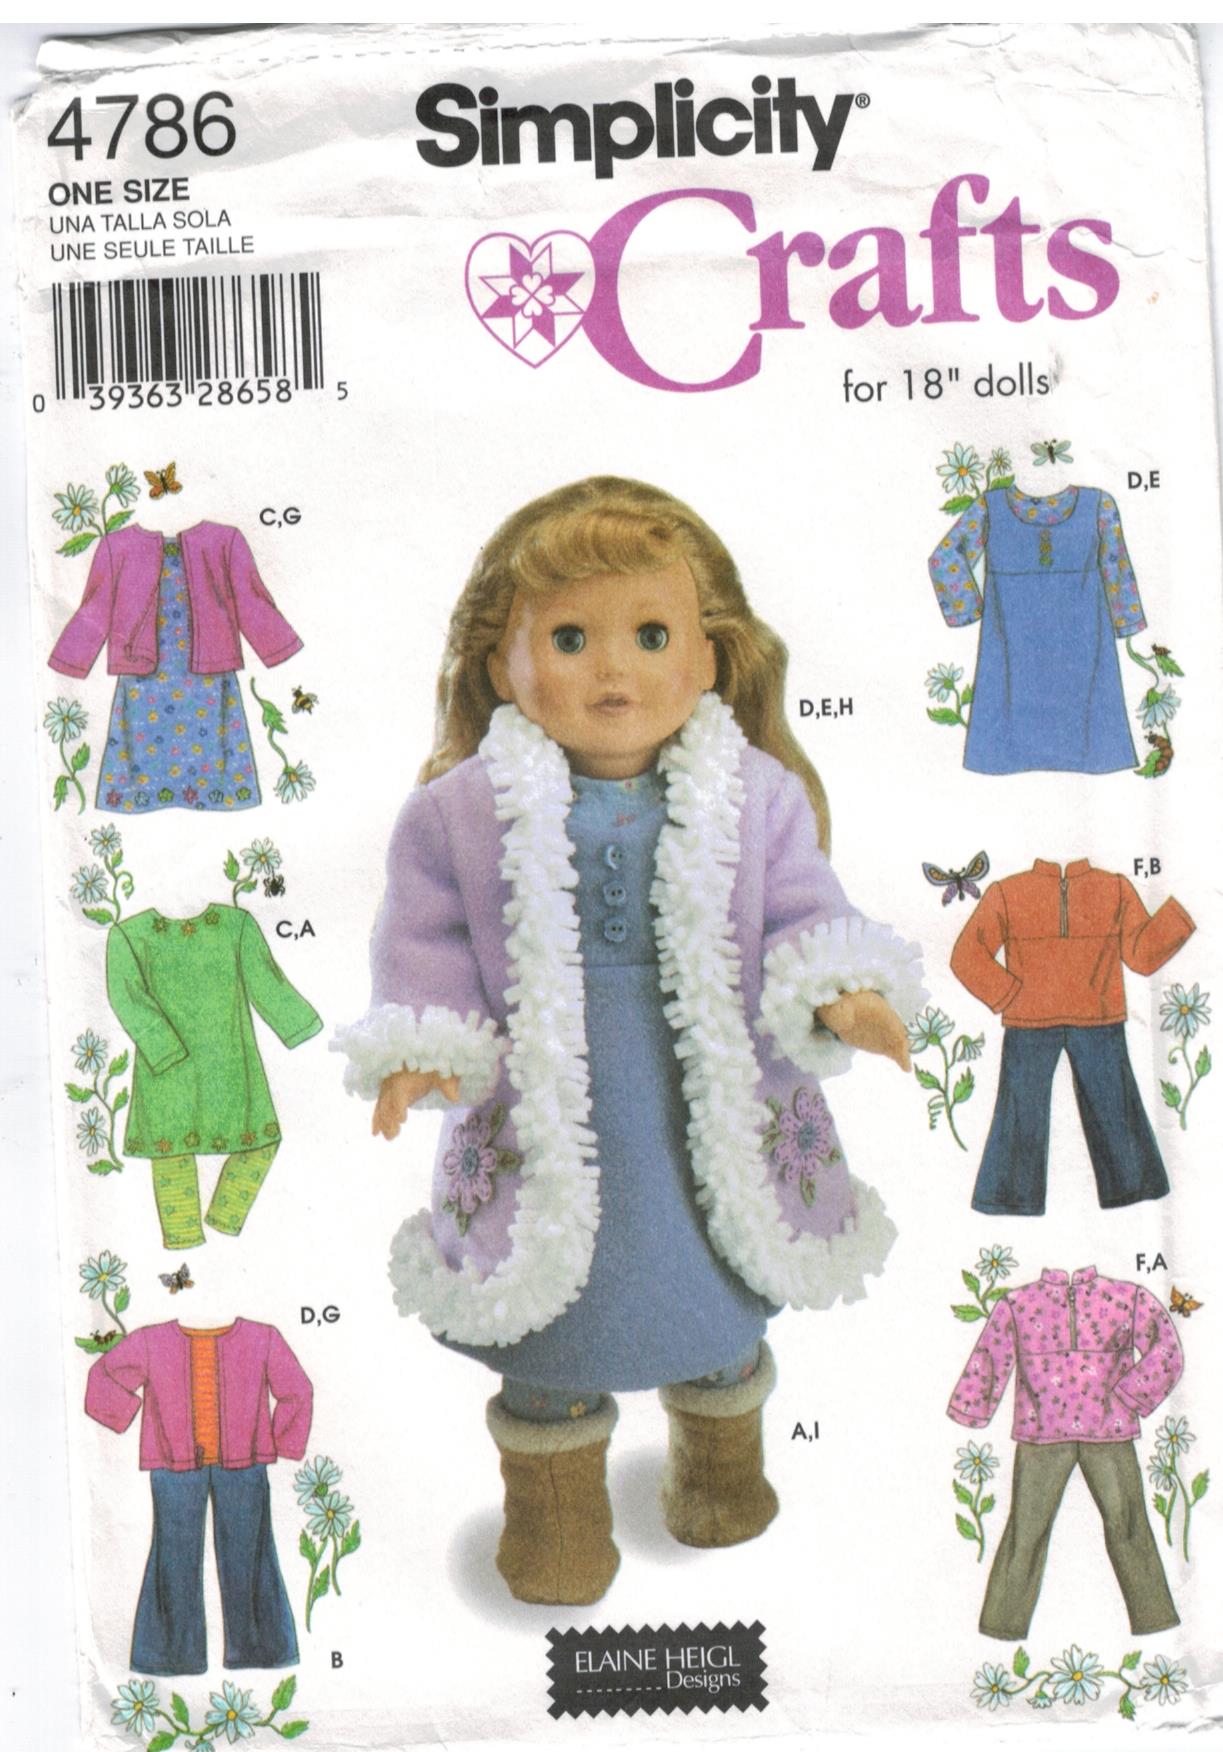 🌻 SIMPLICITY #8535 - CUTE 18 AMERICAN GIRL DOLL - SEW FOUR OUTFITS  PATTERN FF